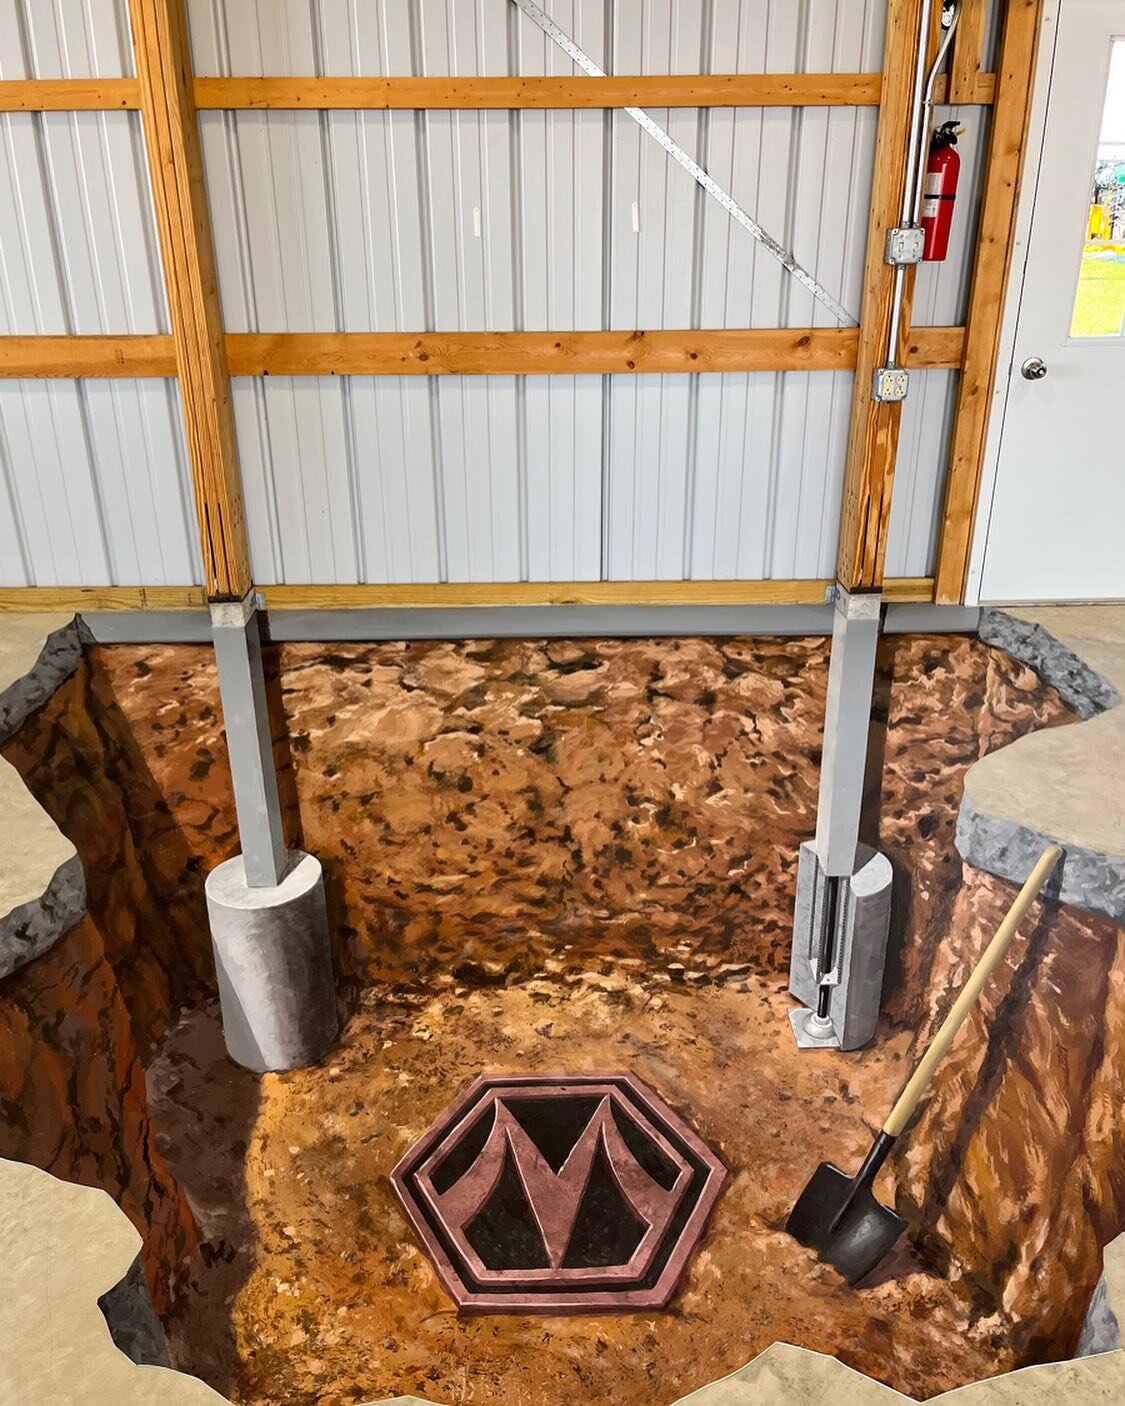 I really like this simple yet effective way of using 3D art to show the mechanical structure of a @mortonbuildings outbuilding. This piece was created with @chriscarlsonart for the Farm Progress show in Decatur, IL.